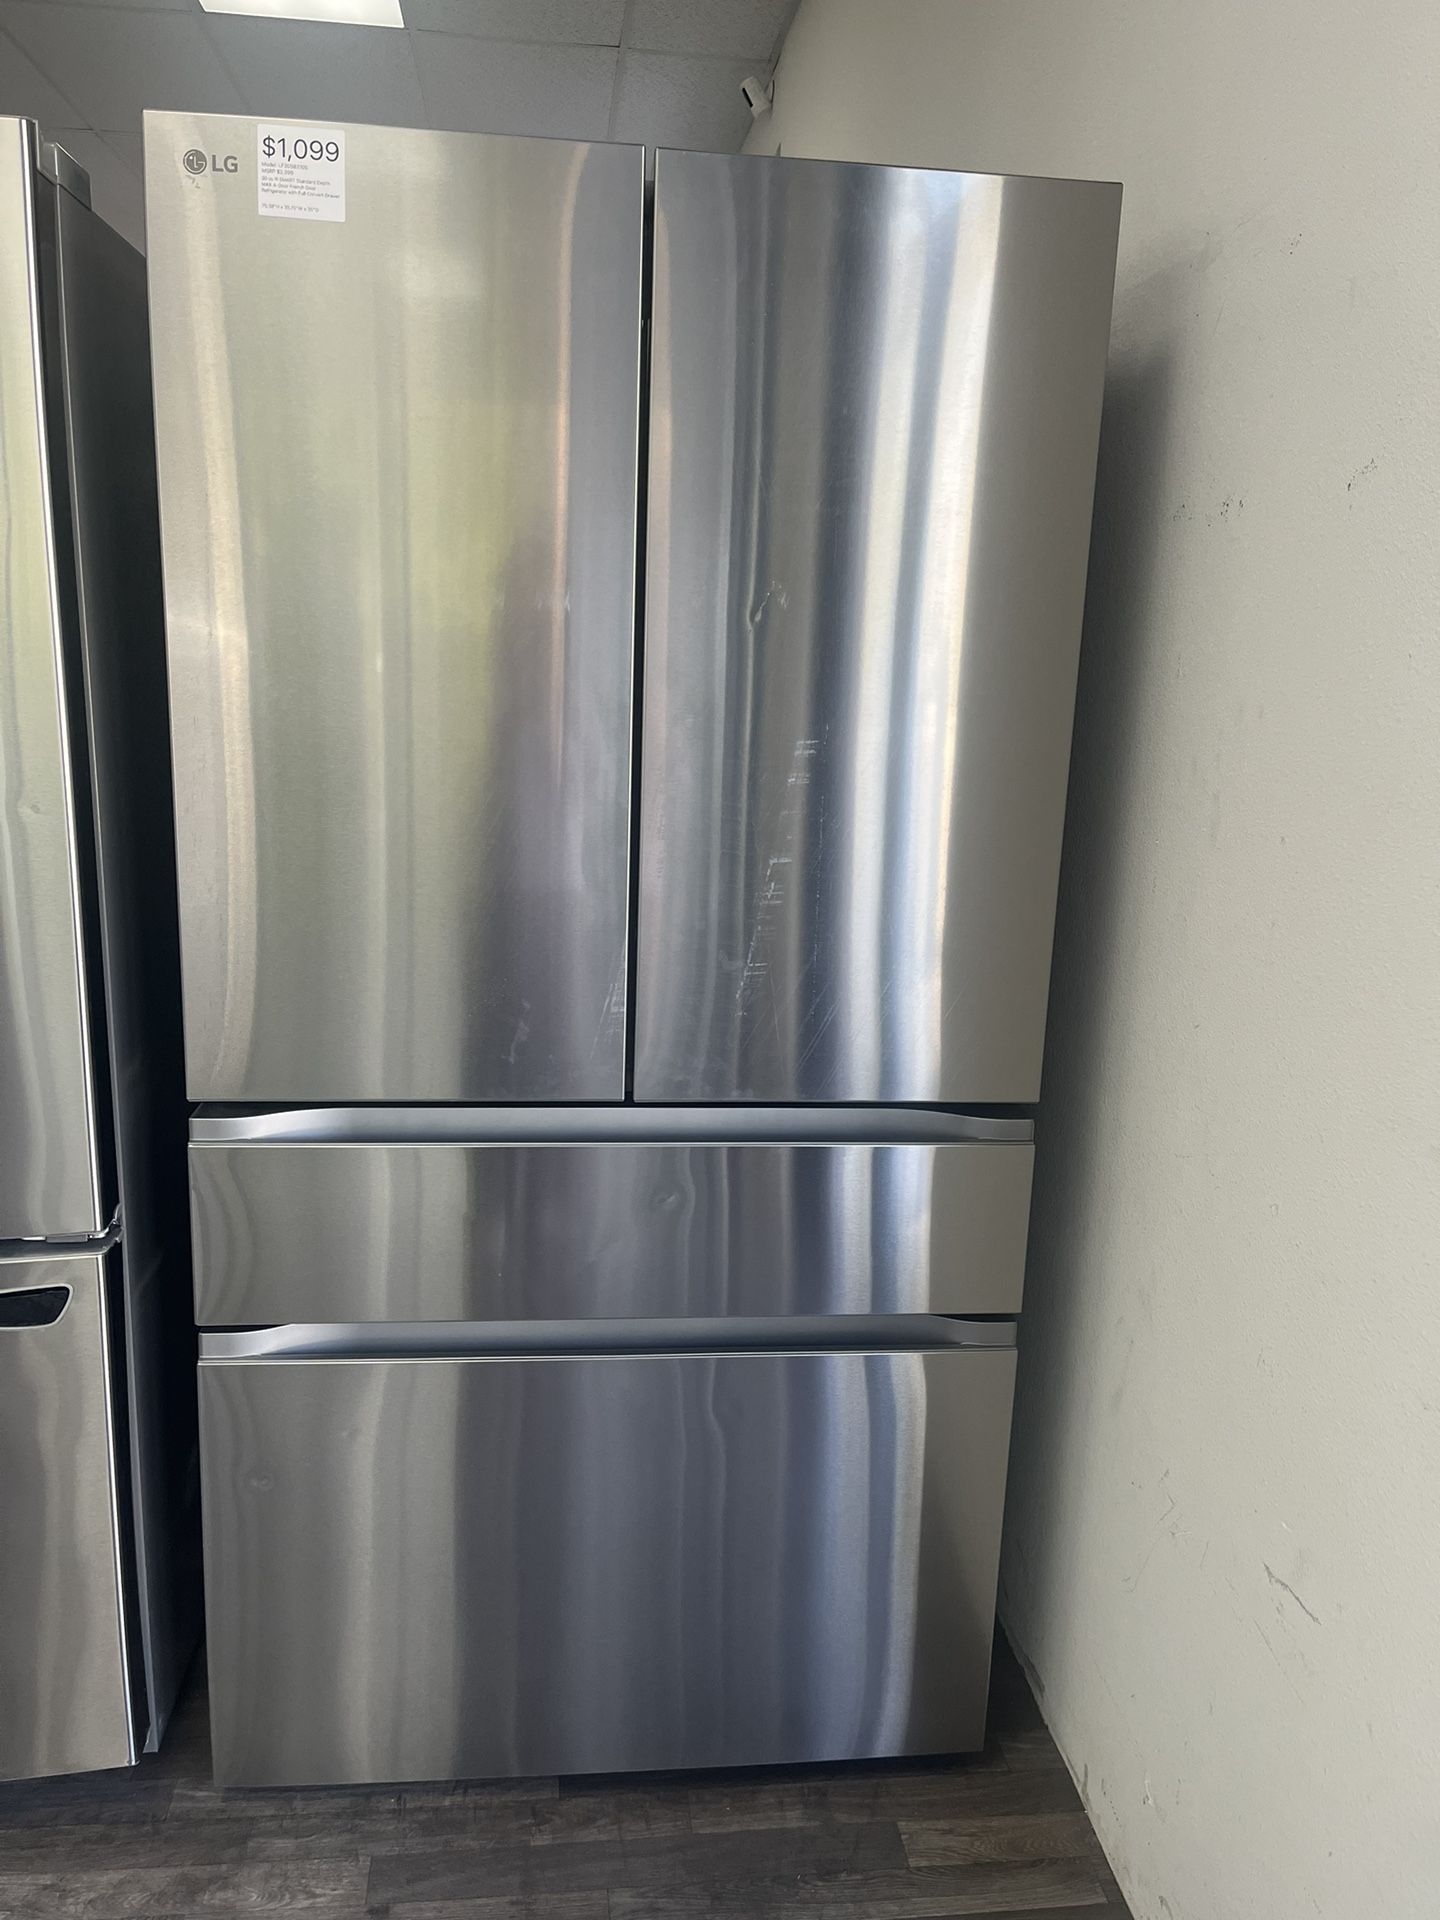 Happy Mother’s Day 🥳 Large Capacity French Door Refrigerator  Full-convert Drawers Was$2399 Now$1099